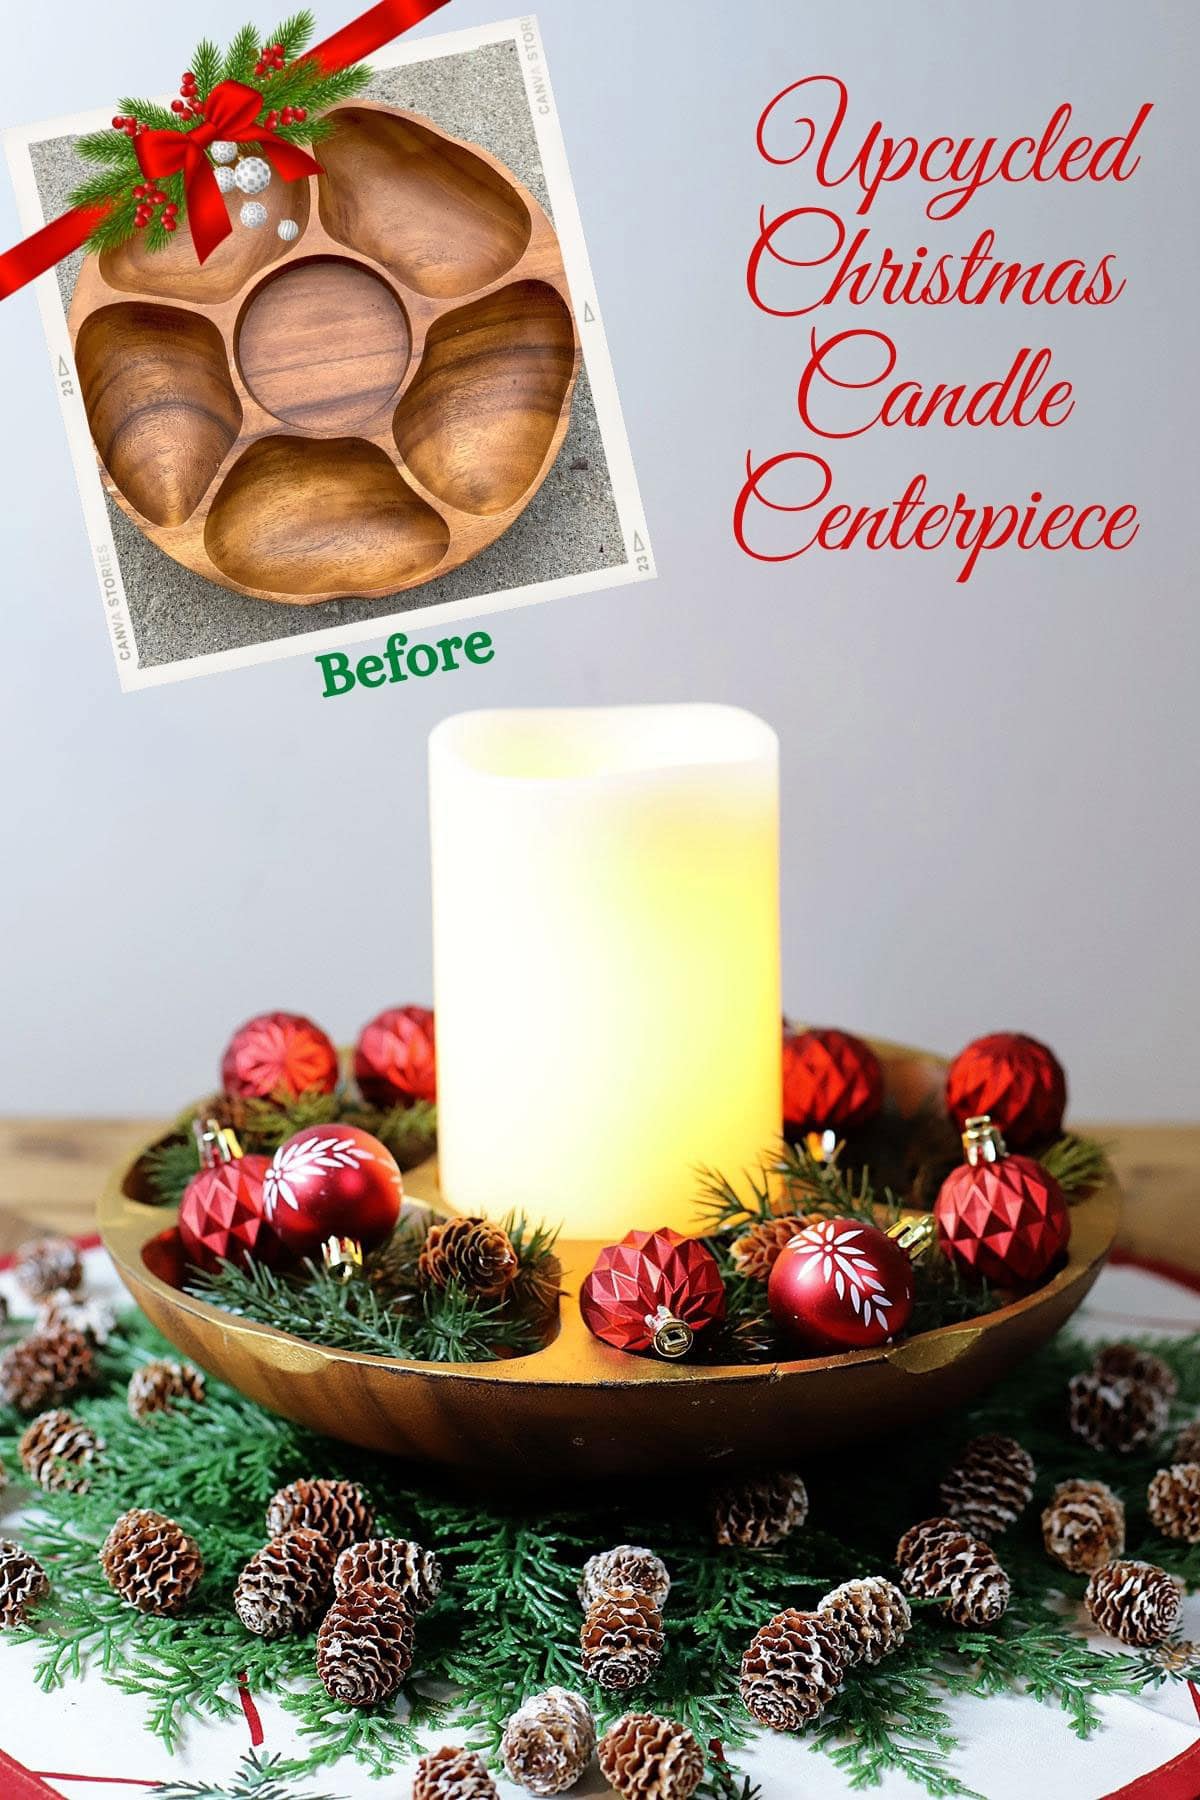 Mid century modern serving bowl upcycled into a Christmas candle holder centerpiece.